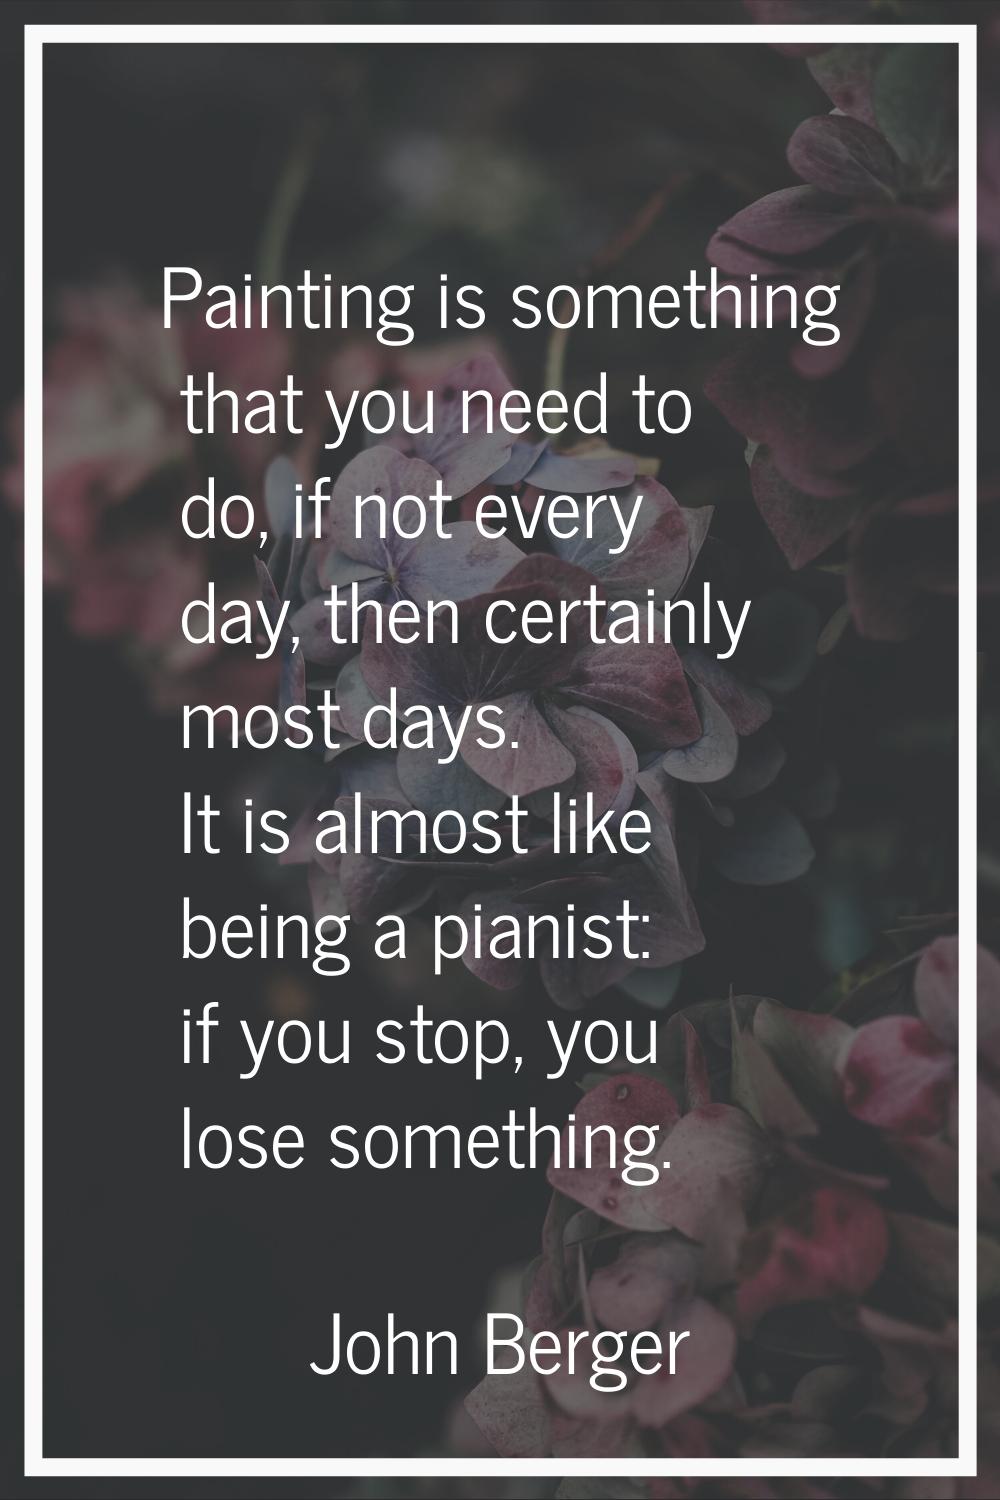 Painting is something that you need to do, if not every day, then certainly most days. It is almost